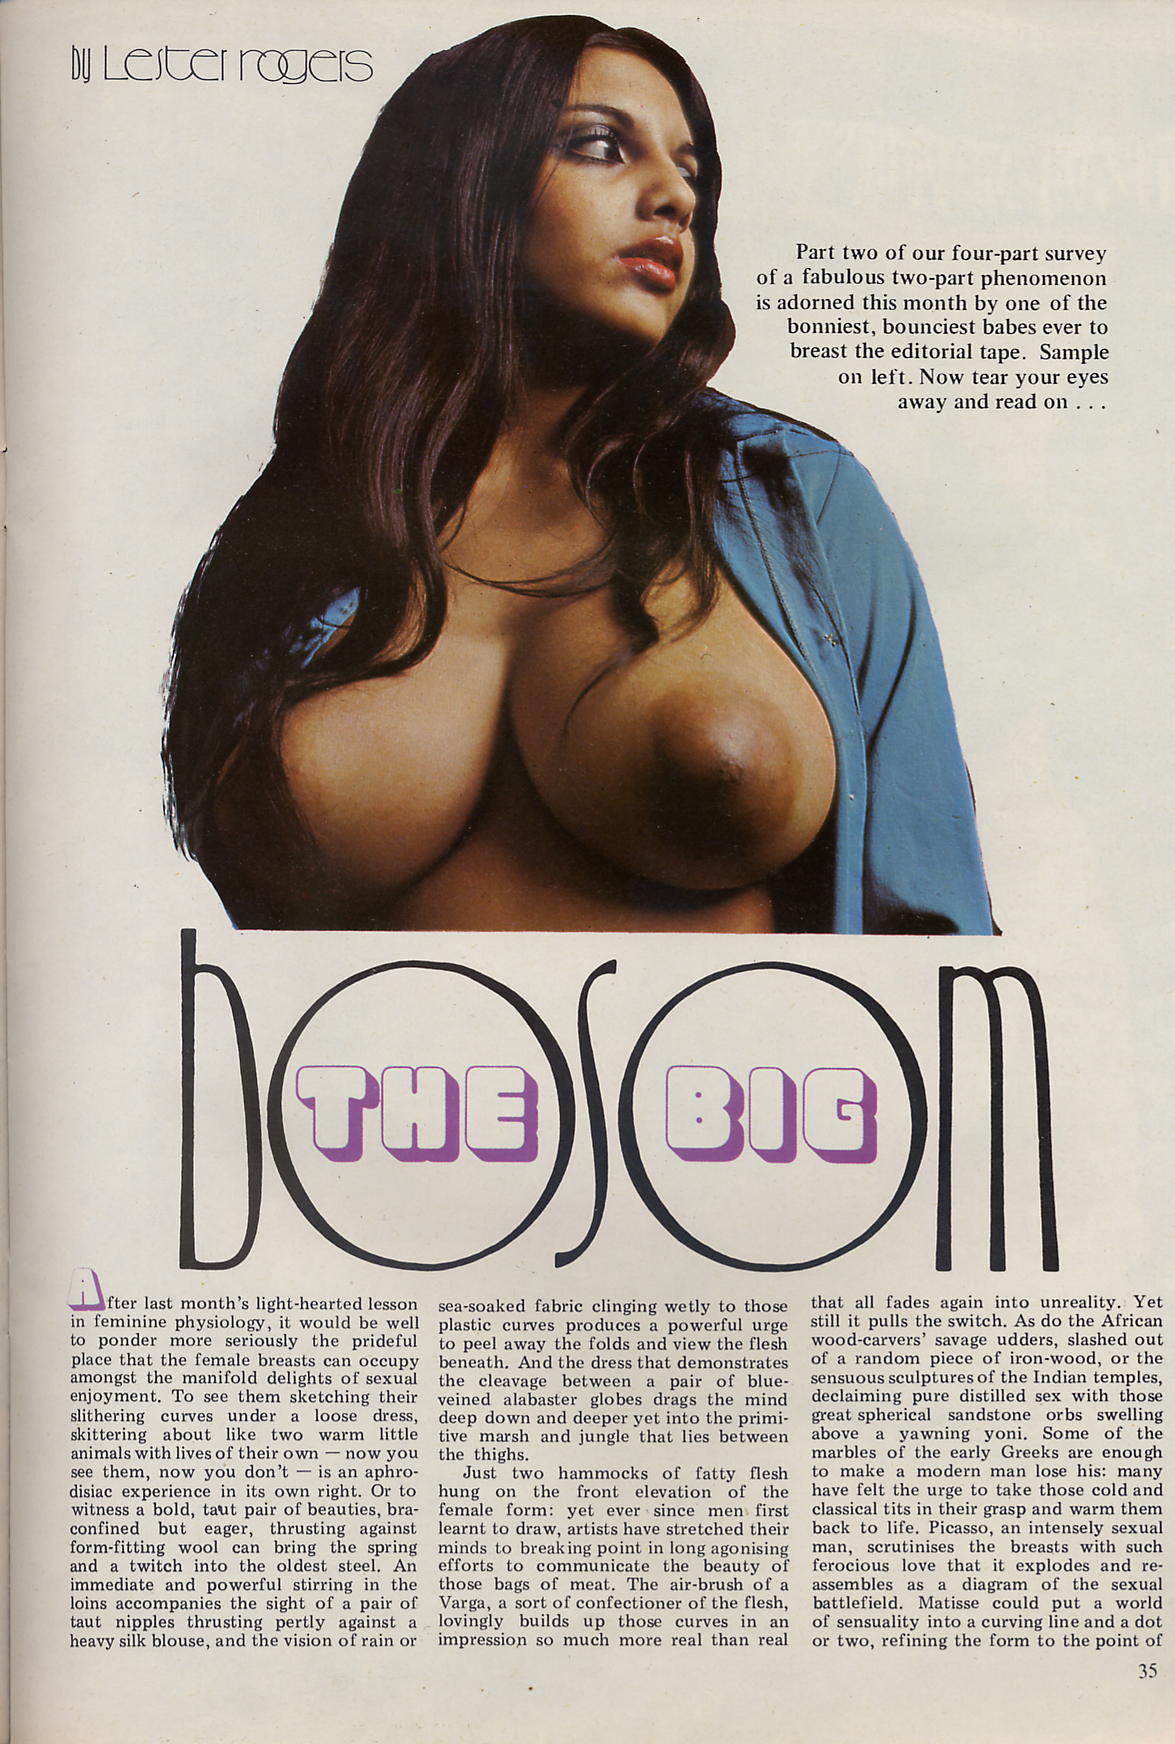 Page one of The Big Bosom article from 1973 - New Direction (May)